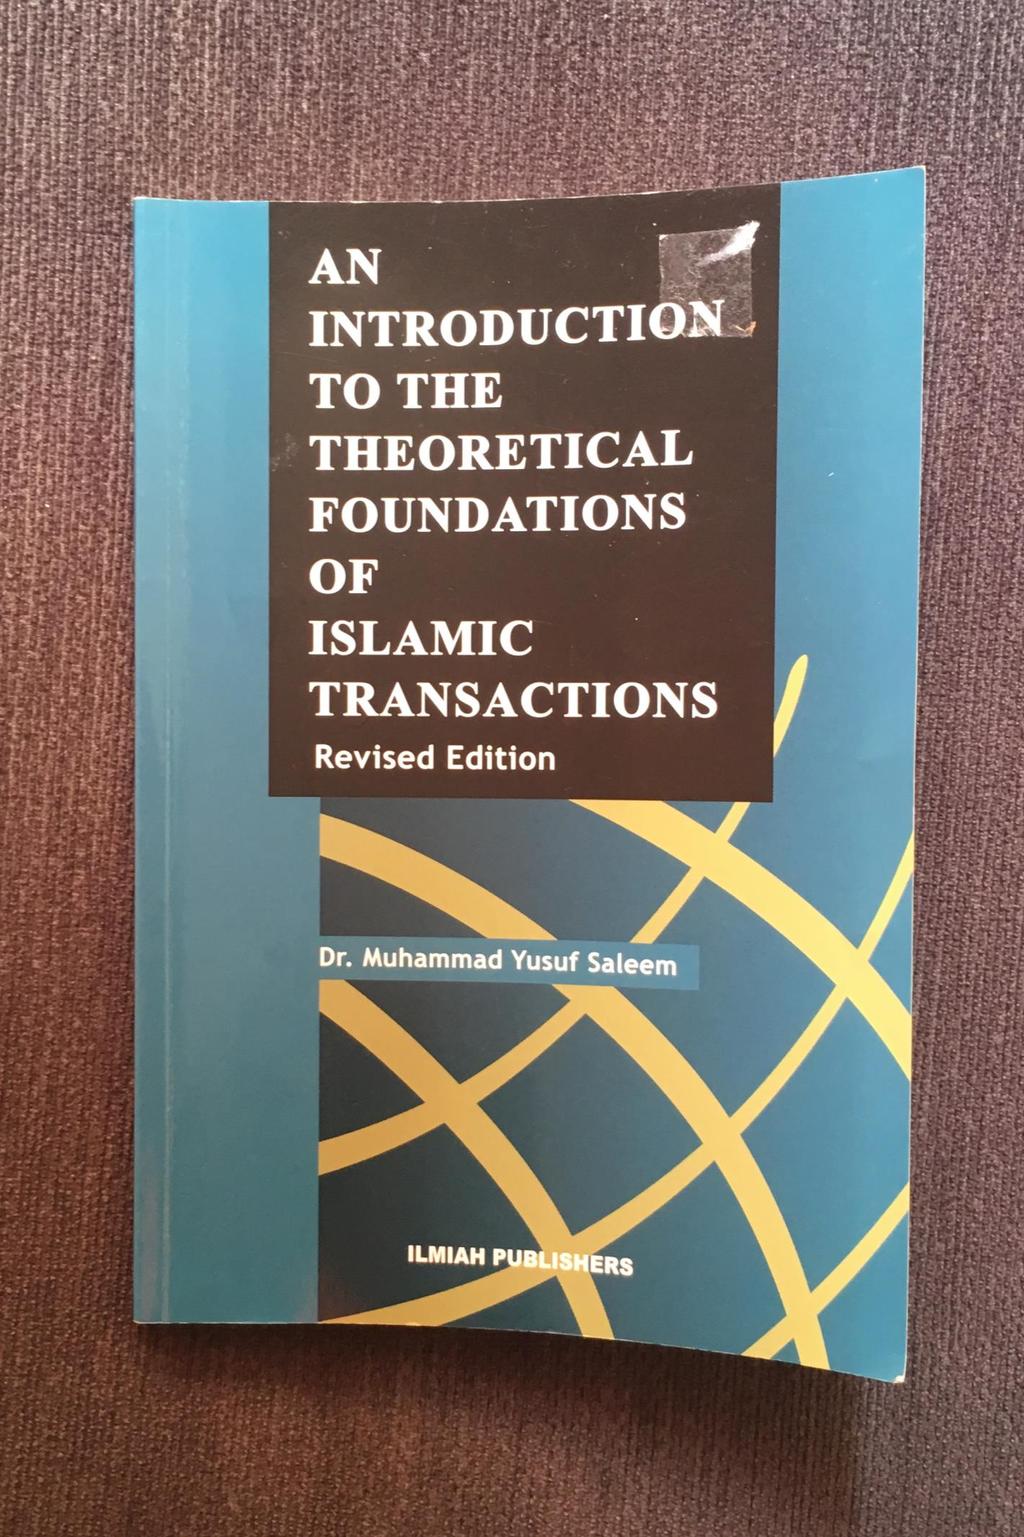 An Introduction to the Theoretical